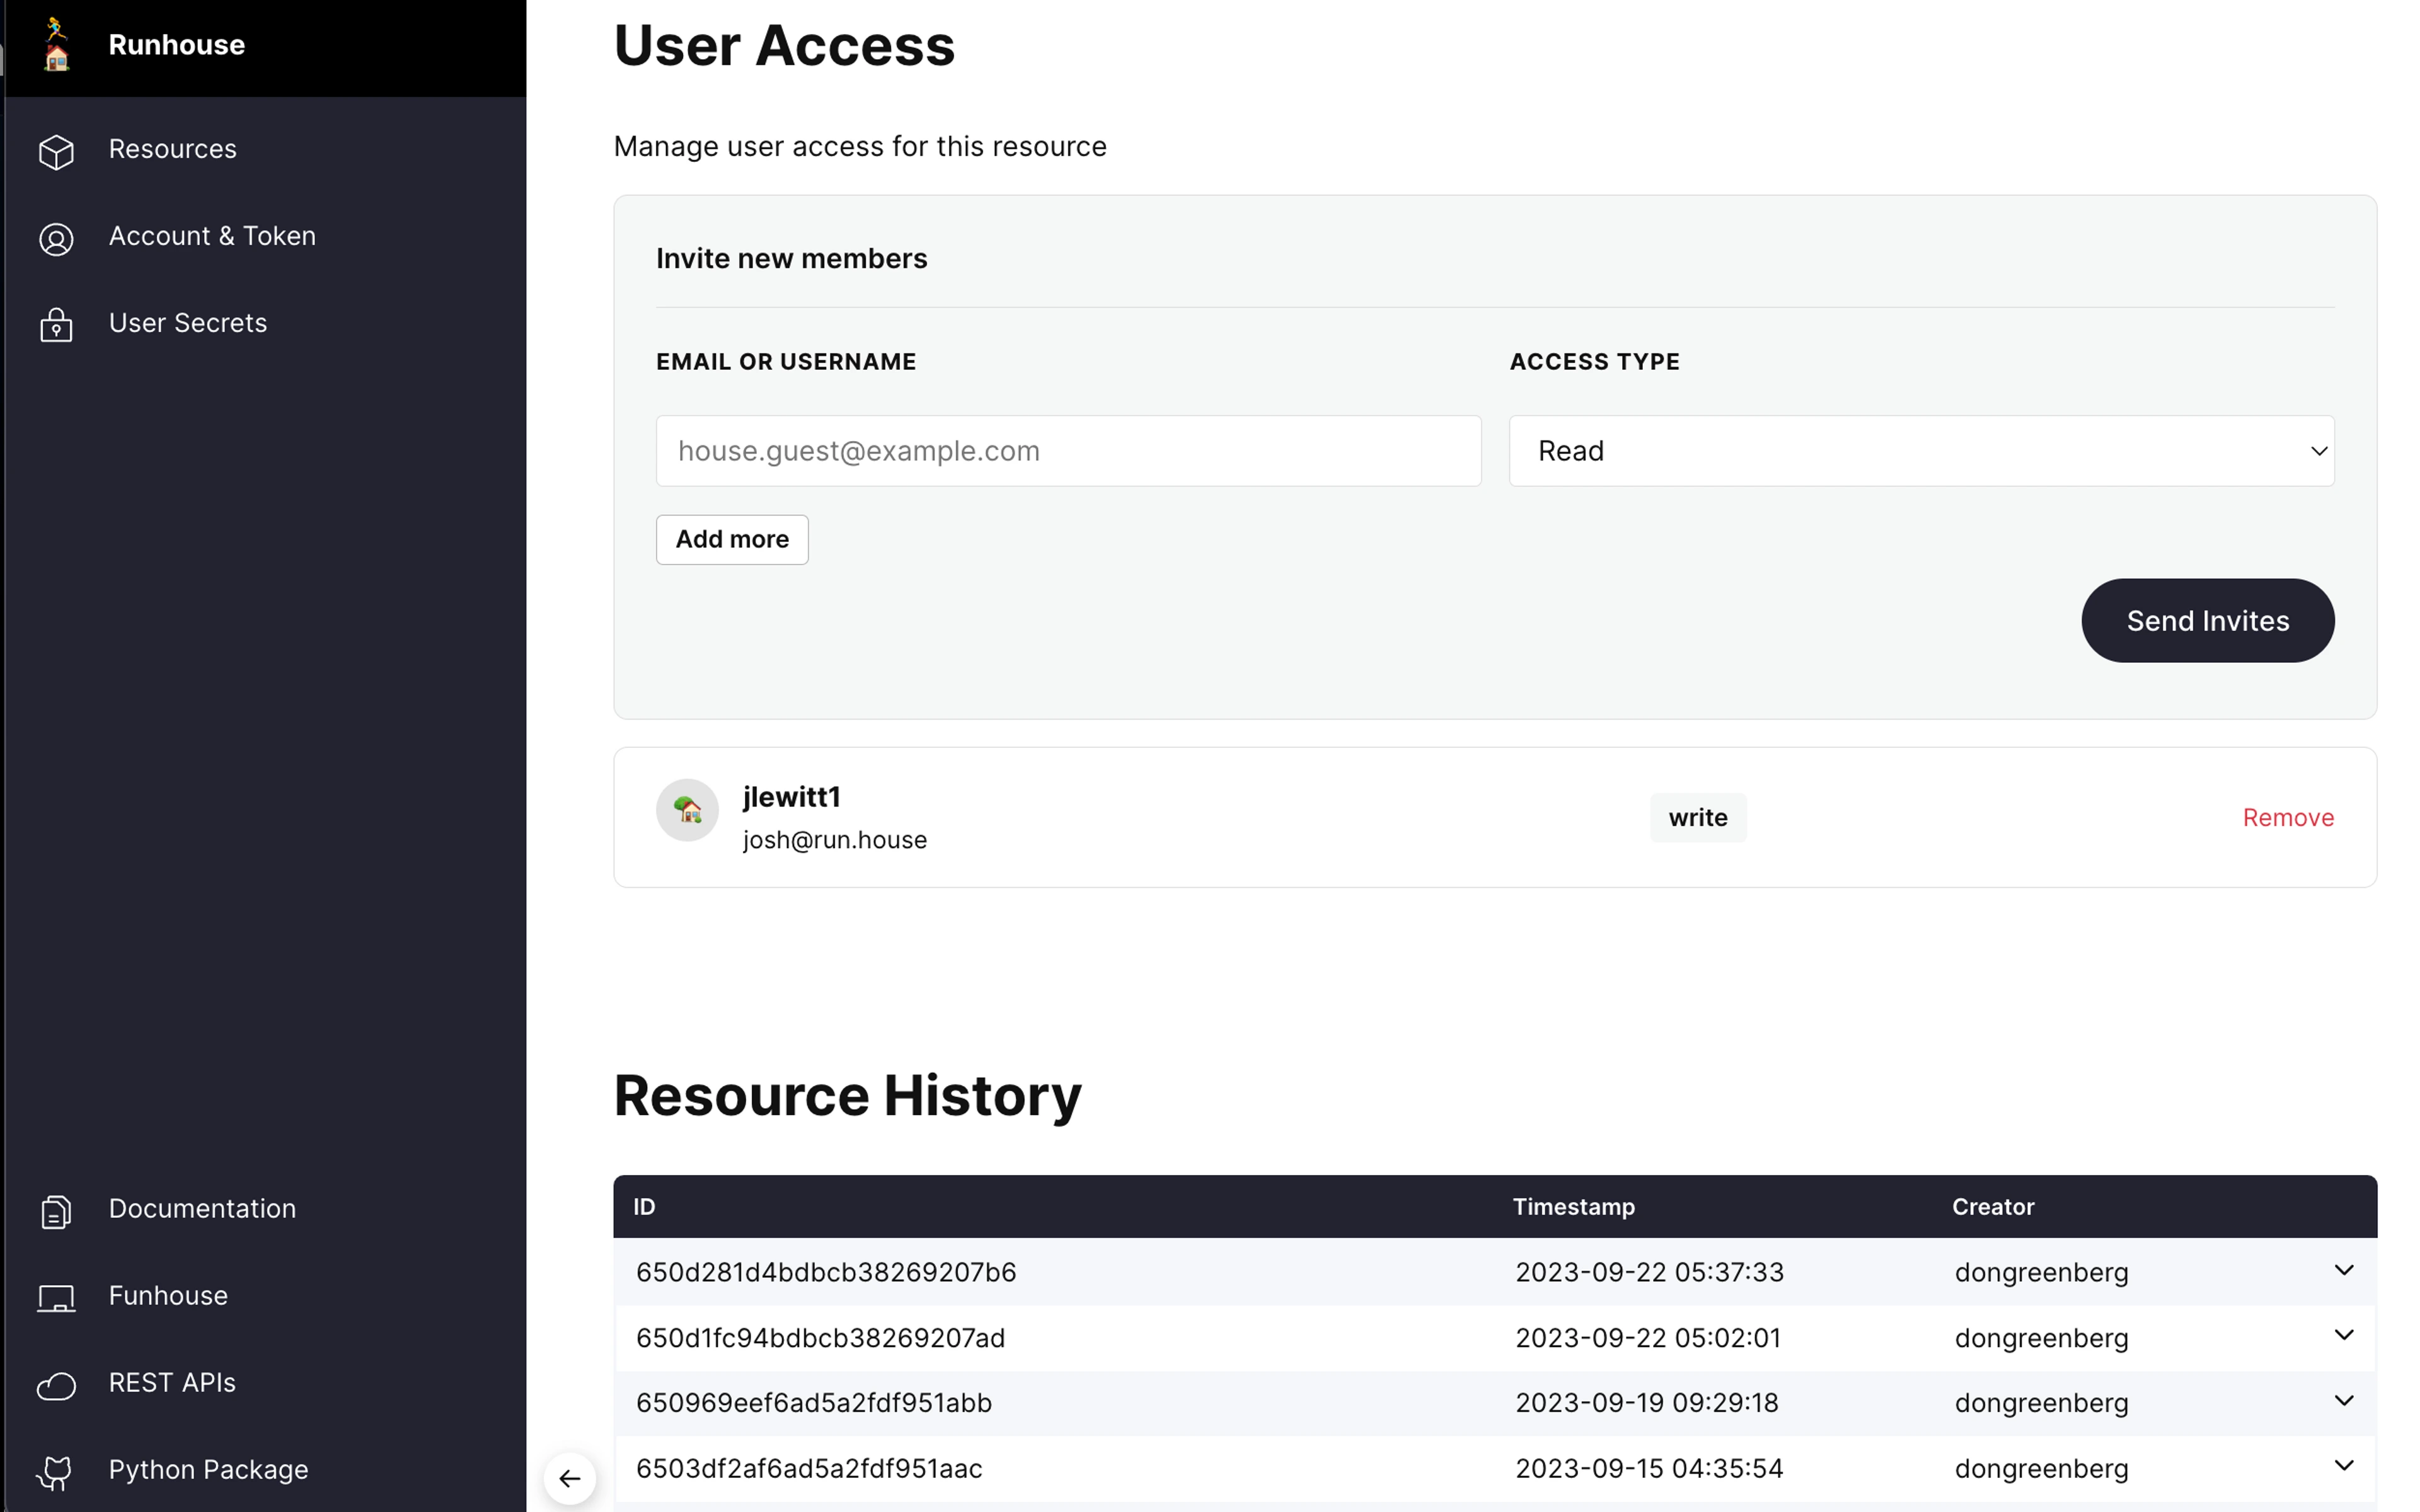 The access control and version view of the resource in Runhouse Den.